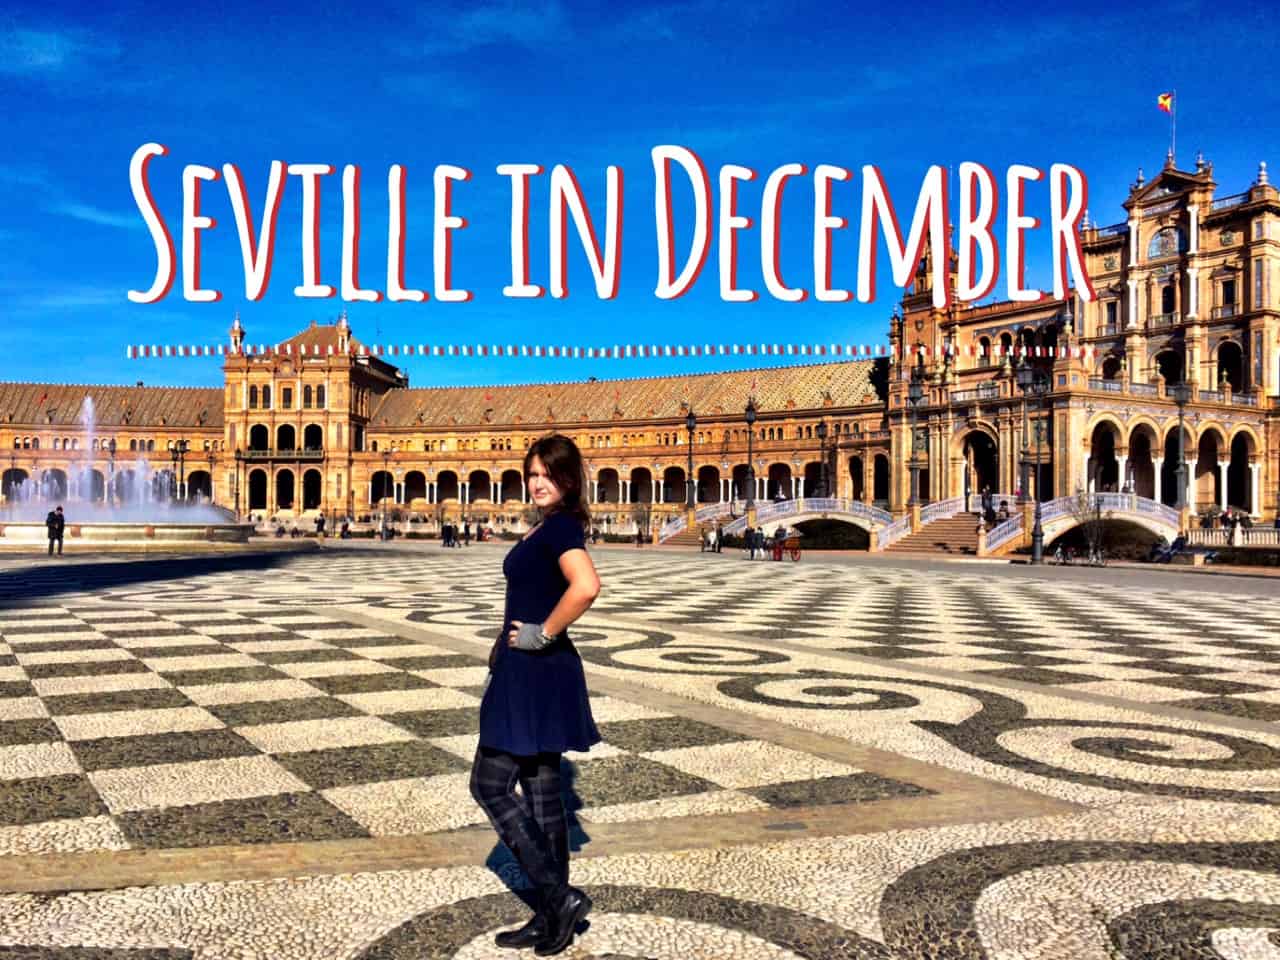 Things to do in Seville in December